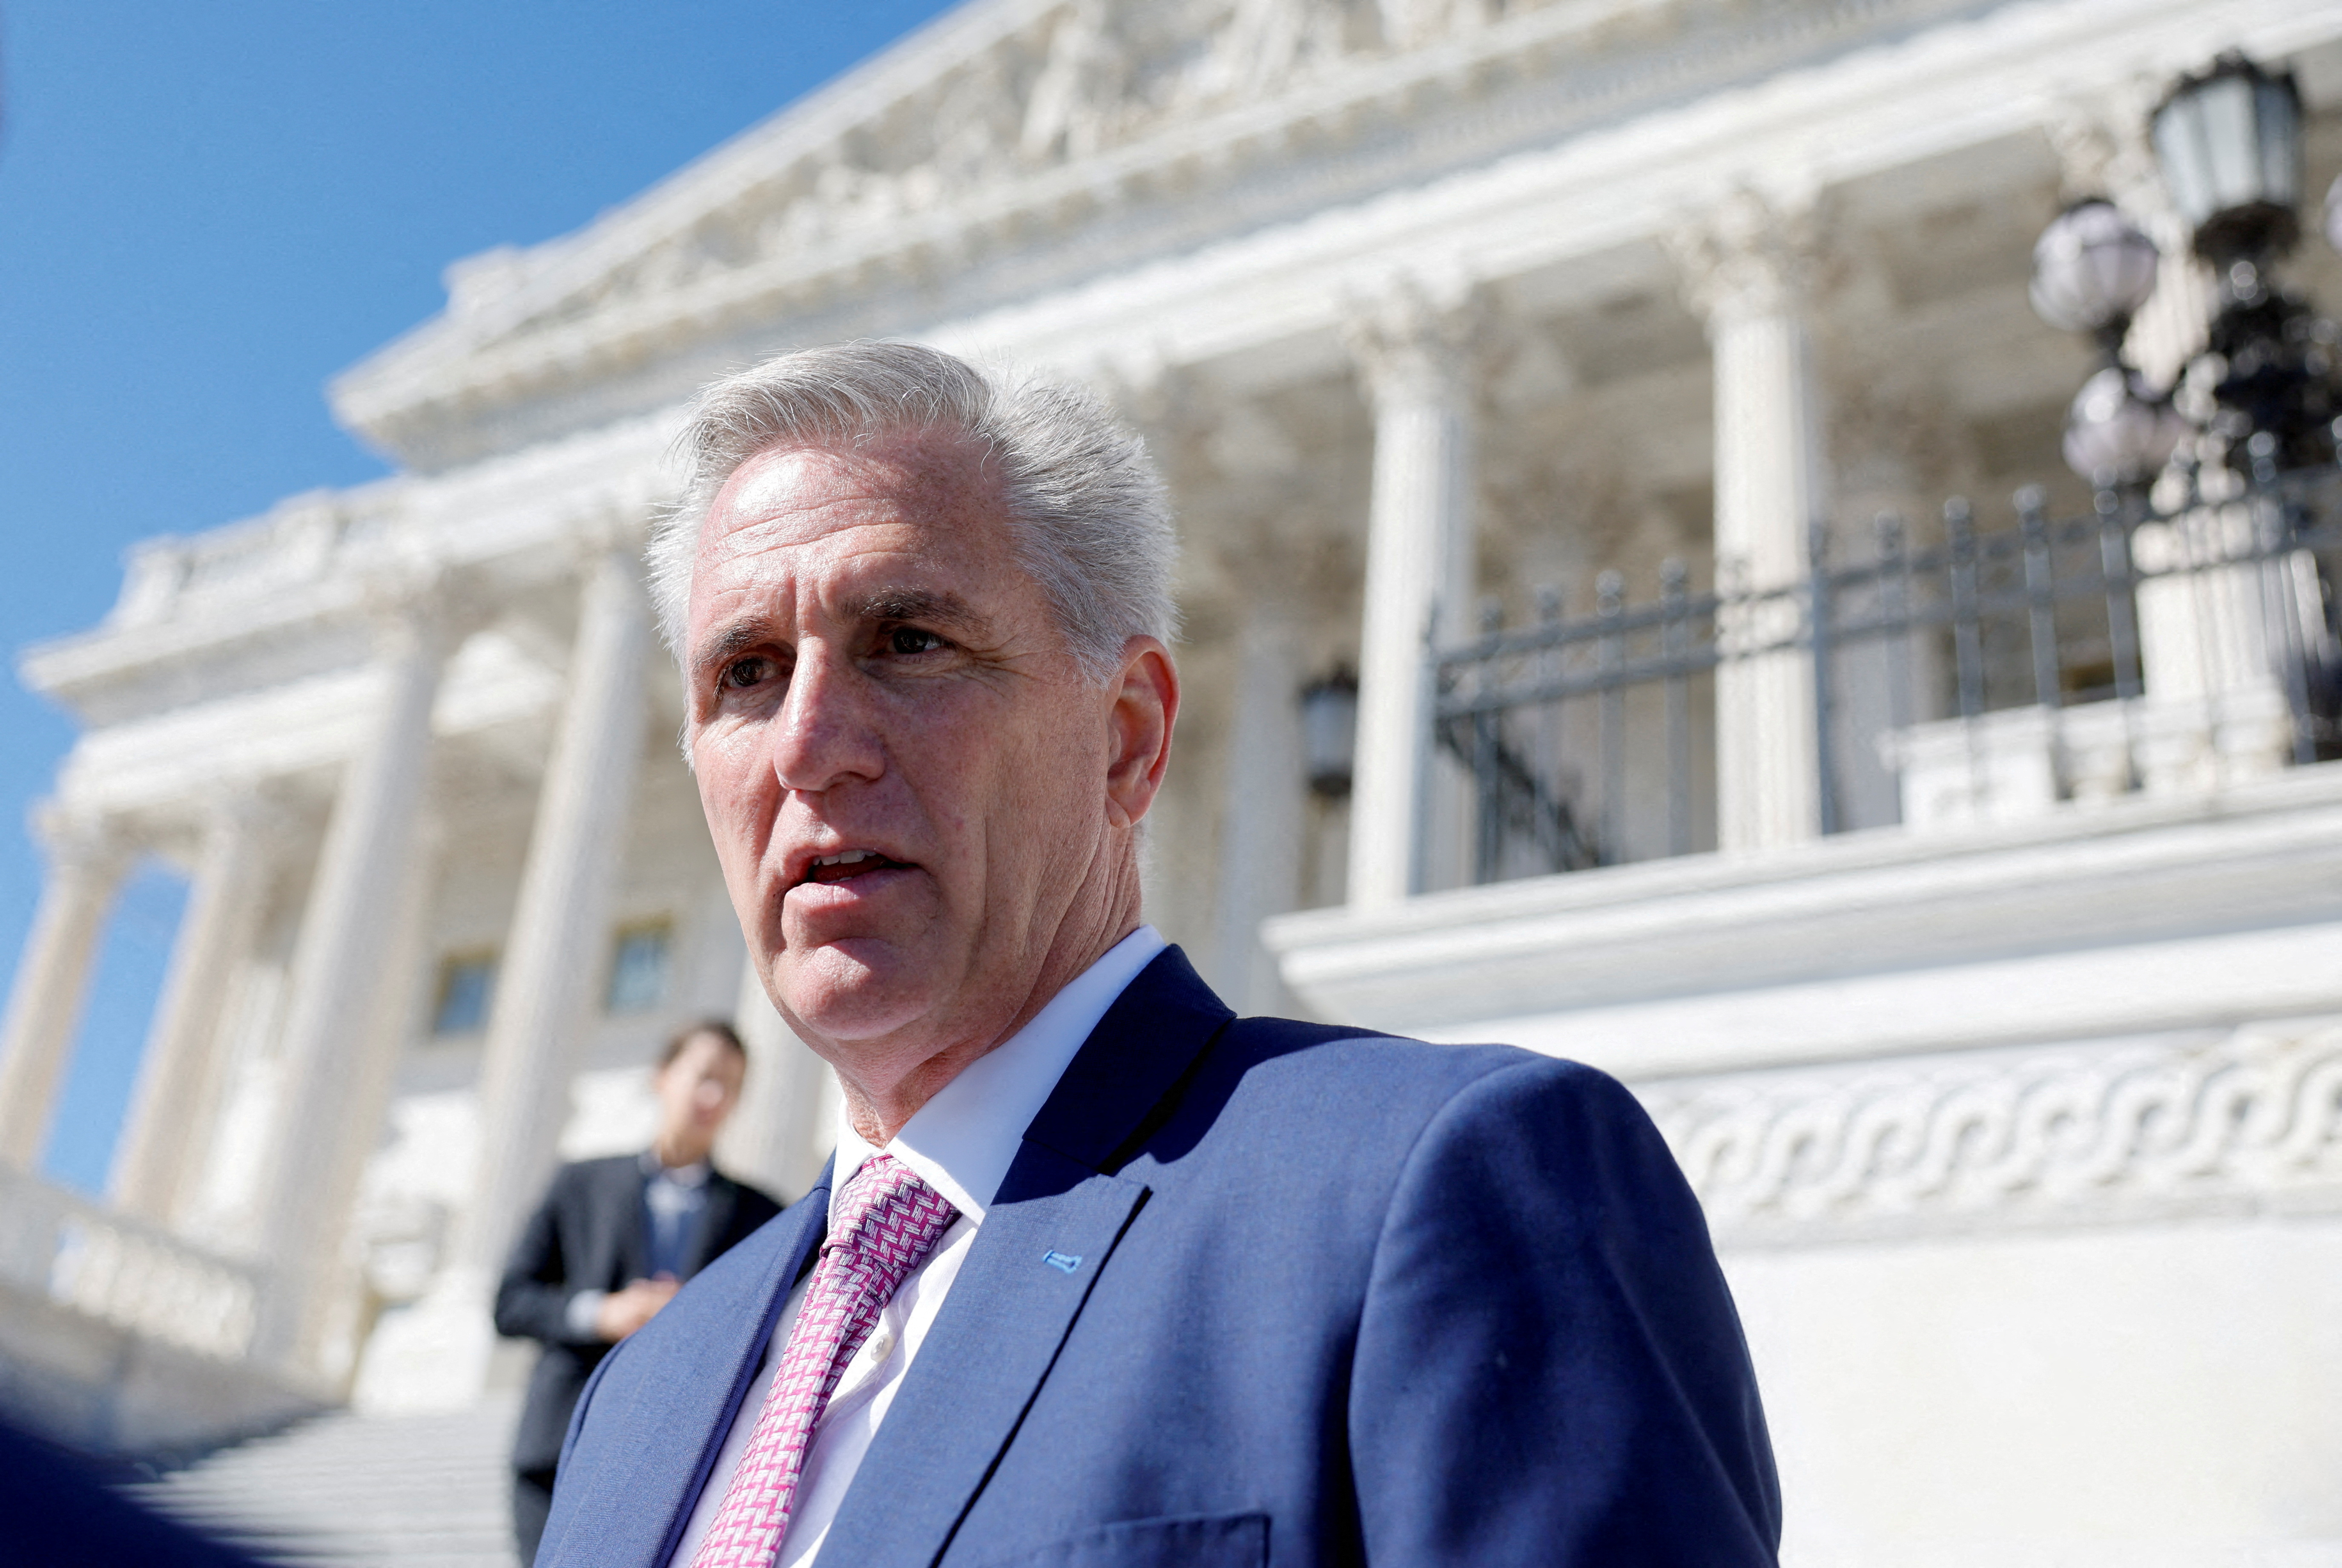 House Minority Leader McCarthy speaks during a news conference in Washington